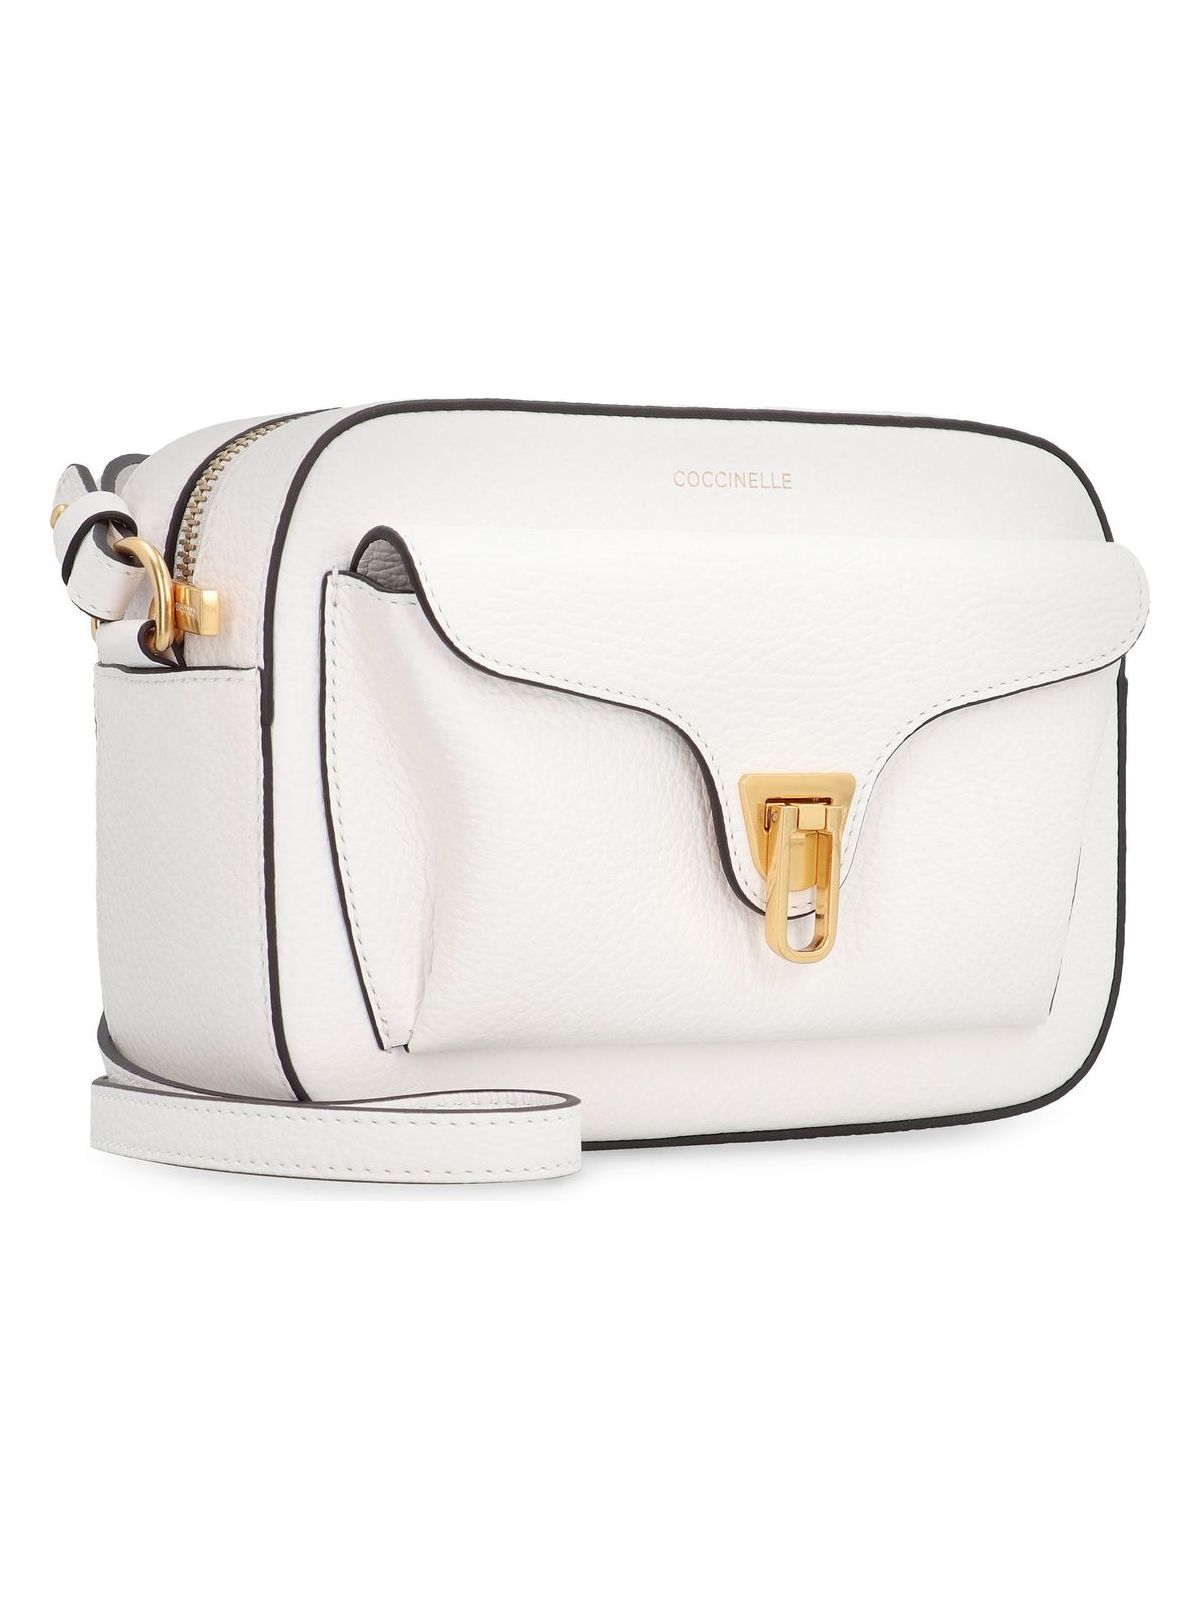 H13 COCCINELLE BEAT SOFT LEATHER CROSSBODY BAG